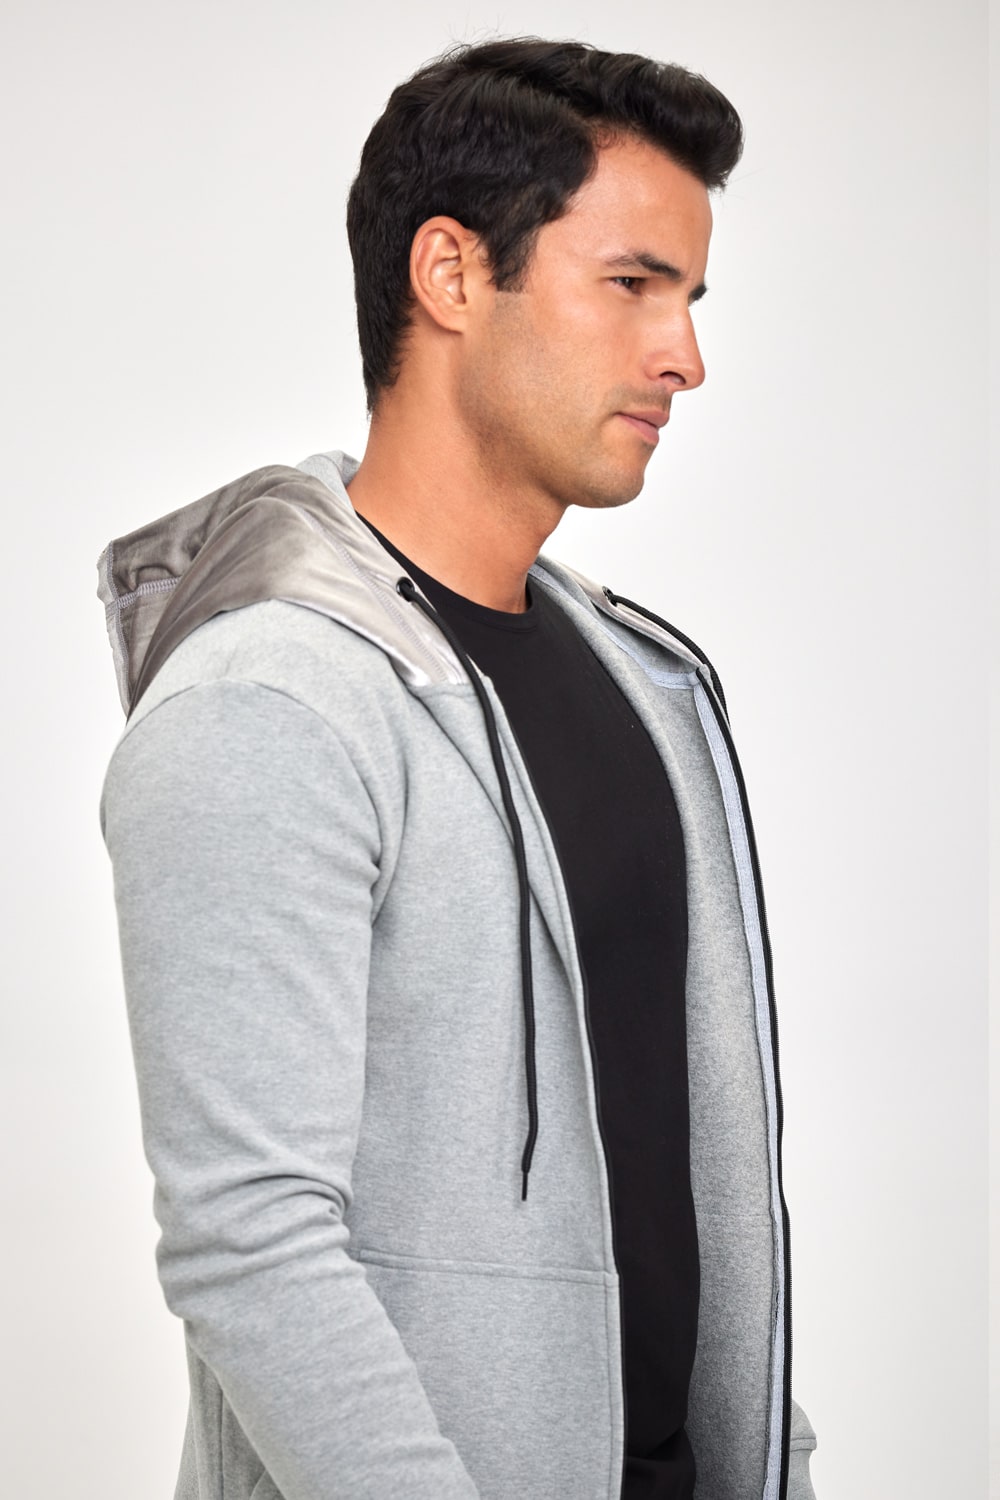 Spacewalker French Terry Hoodie - Astronaut Silver